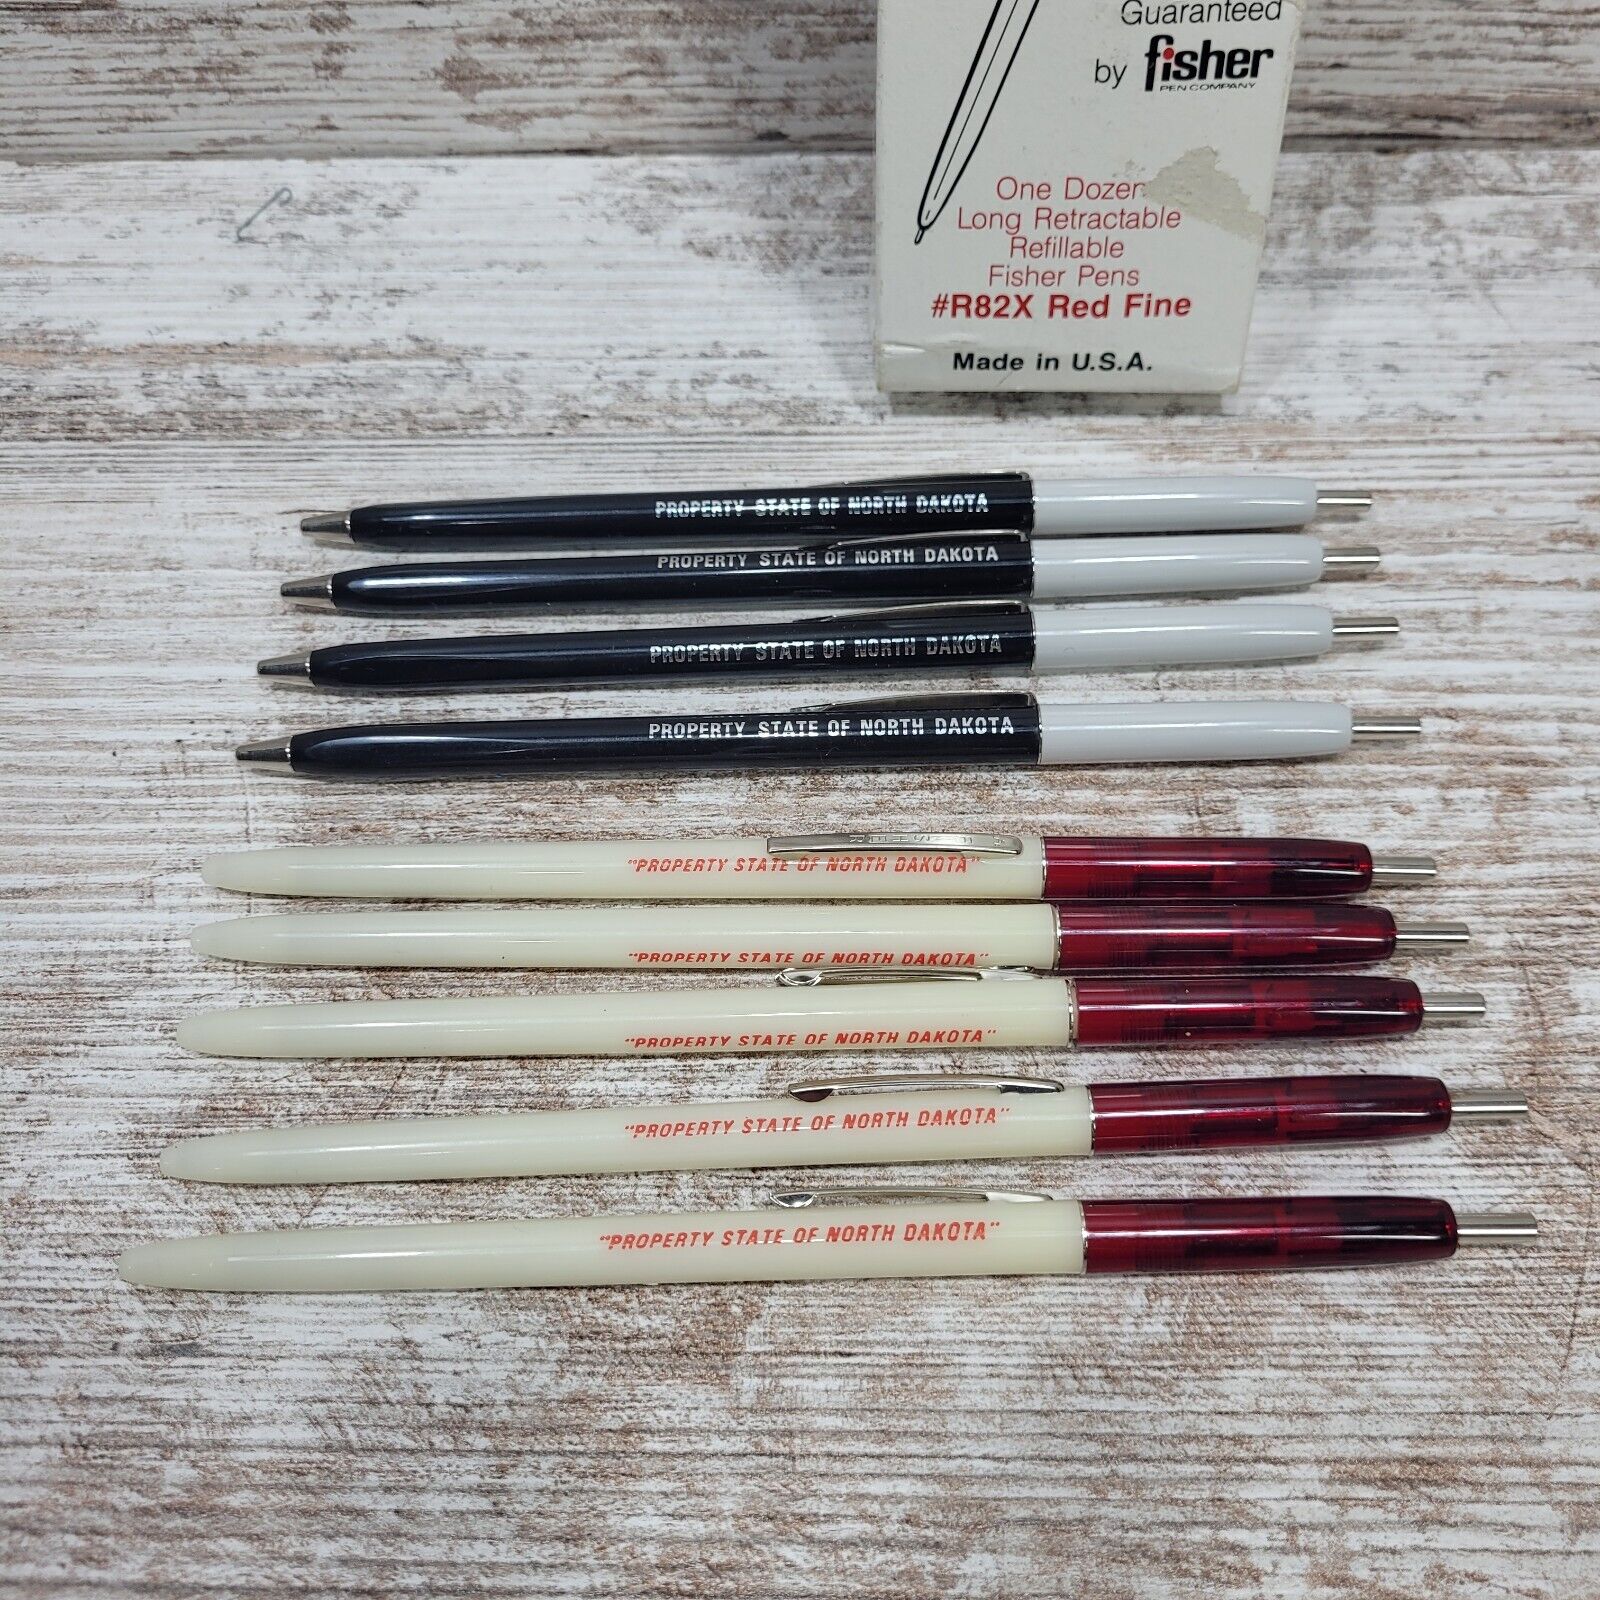 VTG USA Fisher Quality Ballpoint Pens Lot of 9 W/BOX Property State Of NORTH DAK